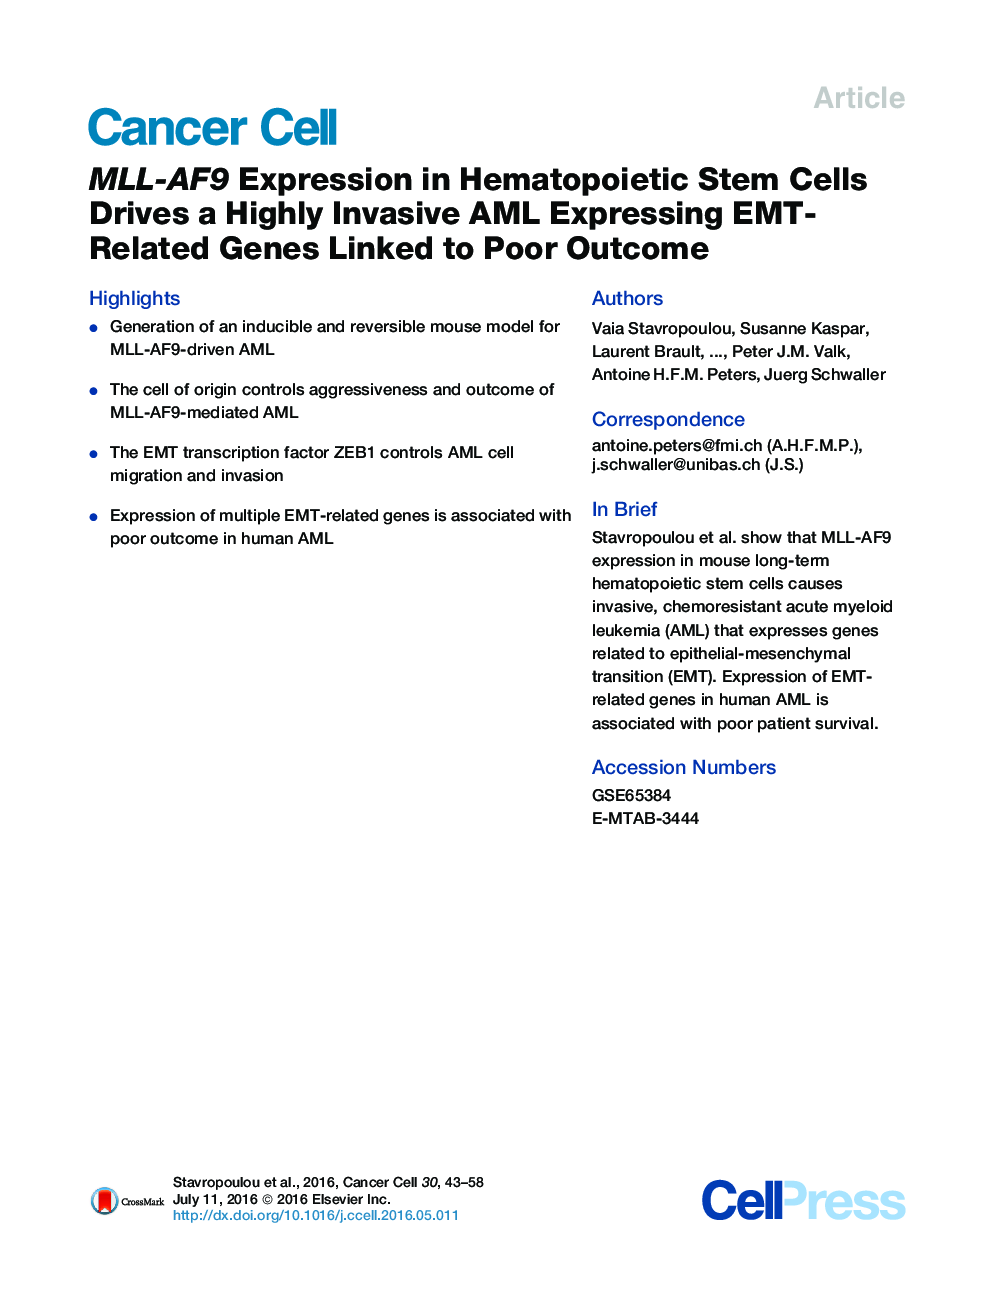 MLL-AF9 Expression in Hematopoietic Stem Cells Drives a Highly Invasive AML Expressing EMT-Related Genes Linked to Poor Outcome